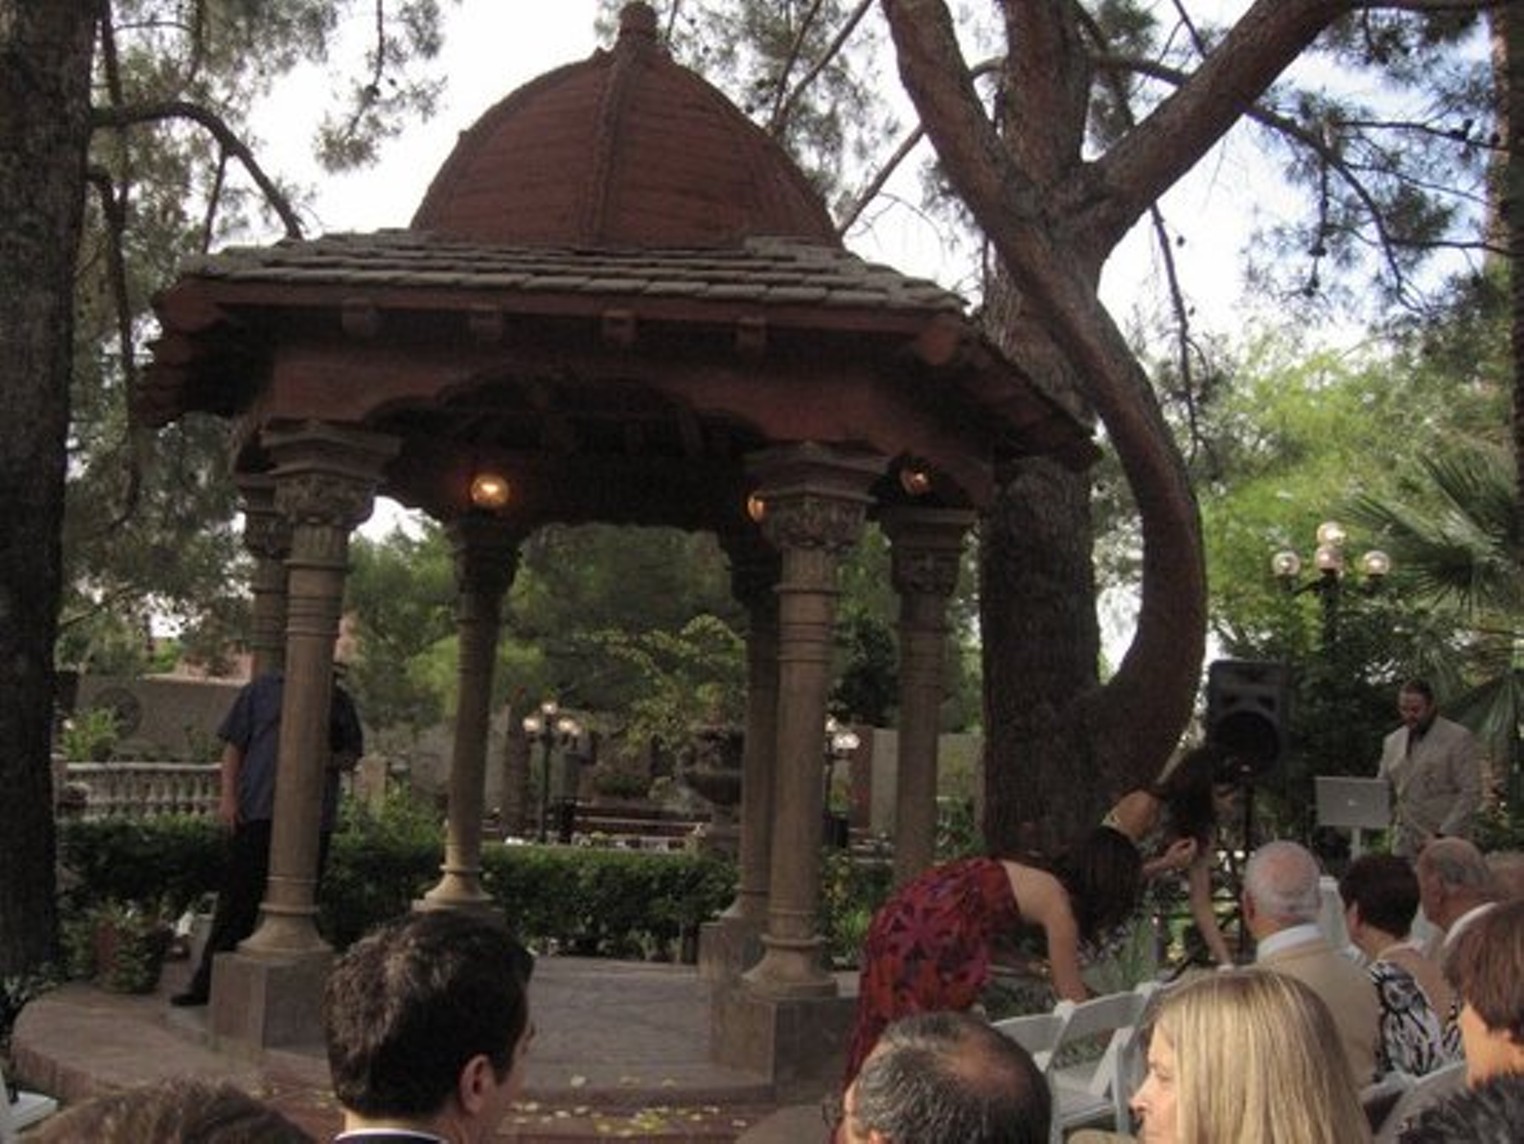 BEST GARDEN OF EDEN IN THE DESERT 2006 The Wright House People and Places Phoenix pic picture